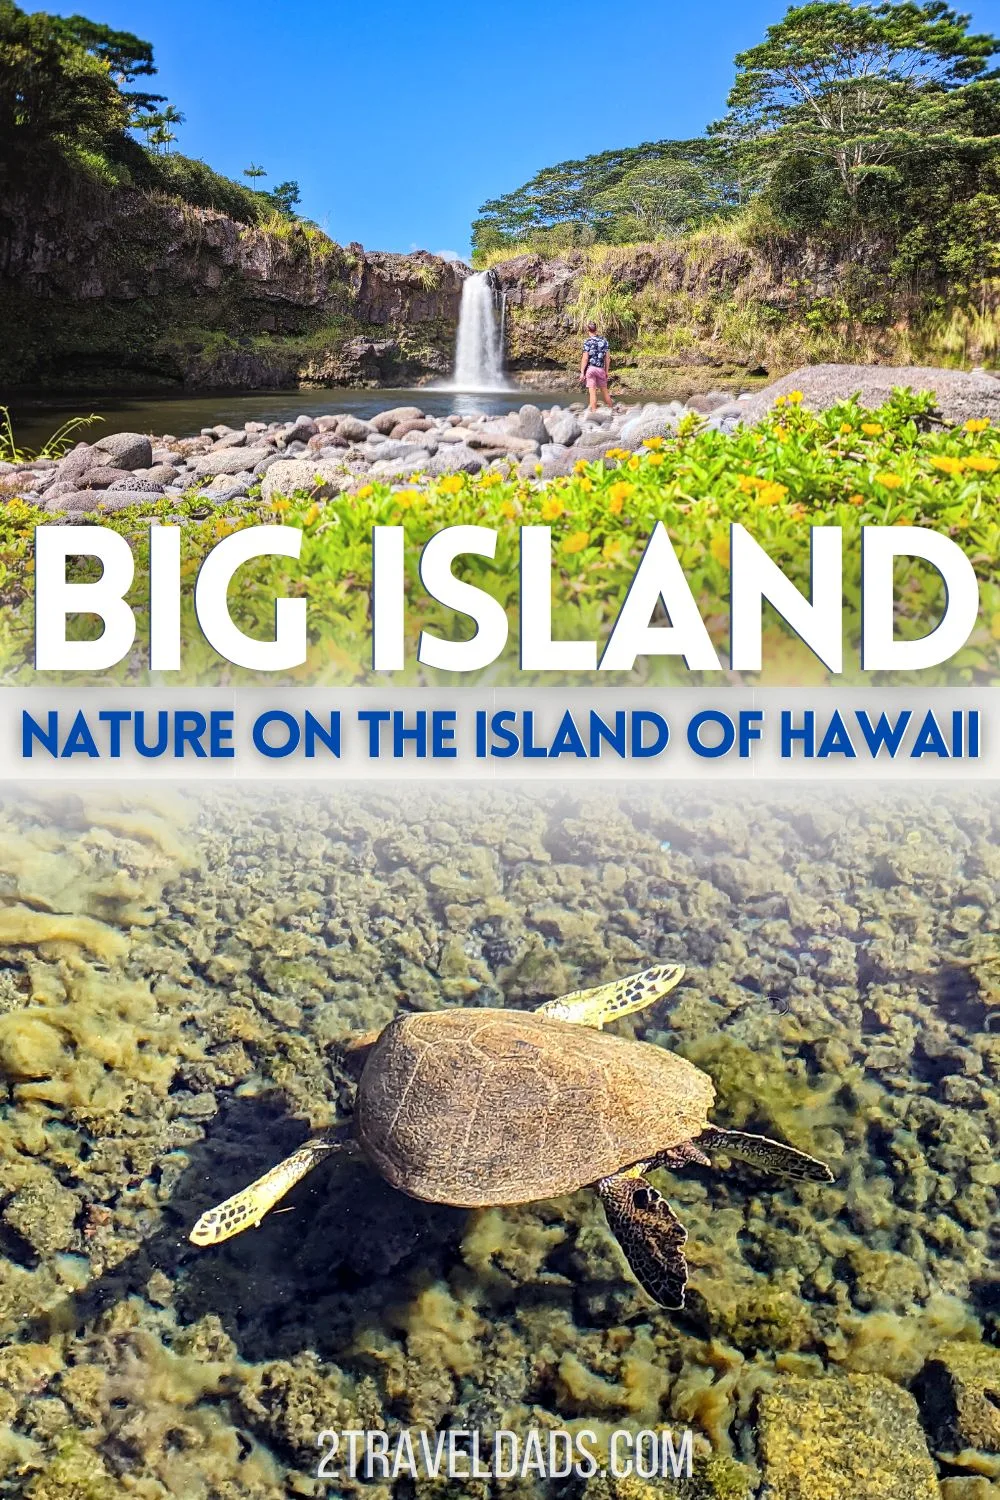 The Big Island of Hawaii has so much nature and unique things to do, it's the perfect Hawaiian experience. From volcanoes to snorkeling or just watching sea turtles on the beach, these are the sights and activities not to miss from Kona to Hilo.